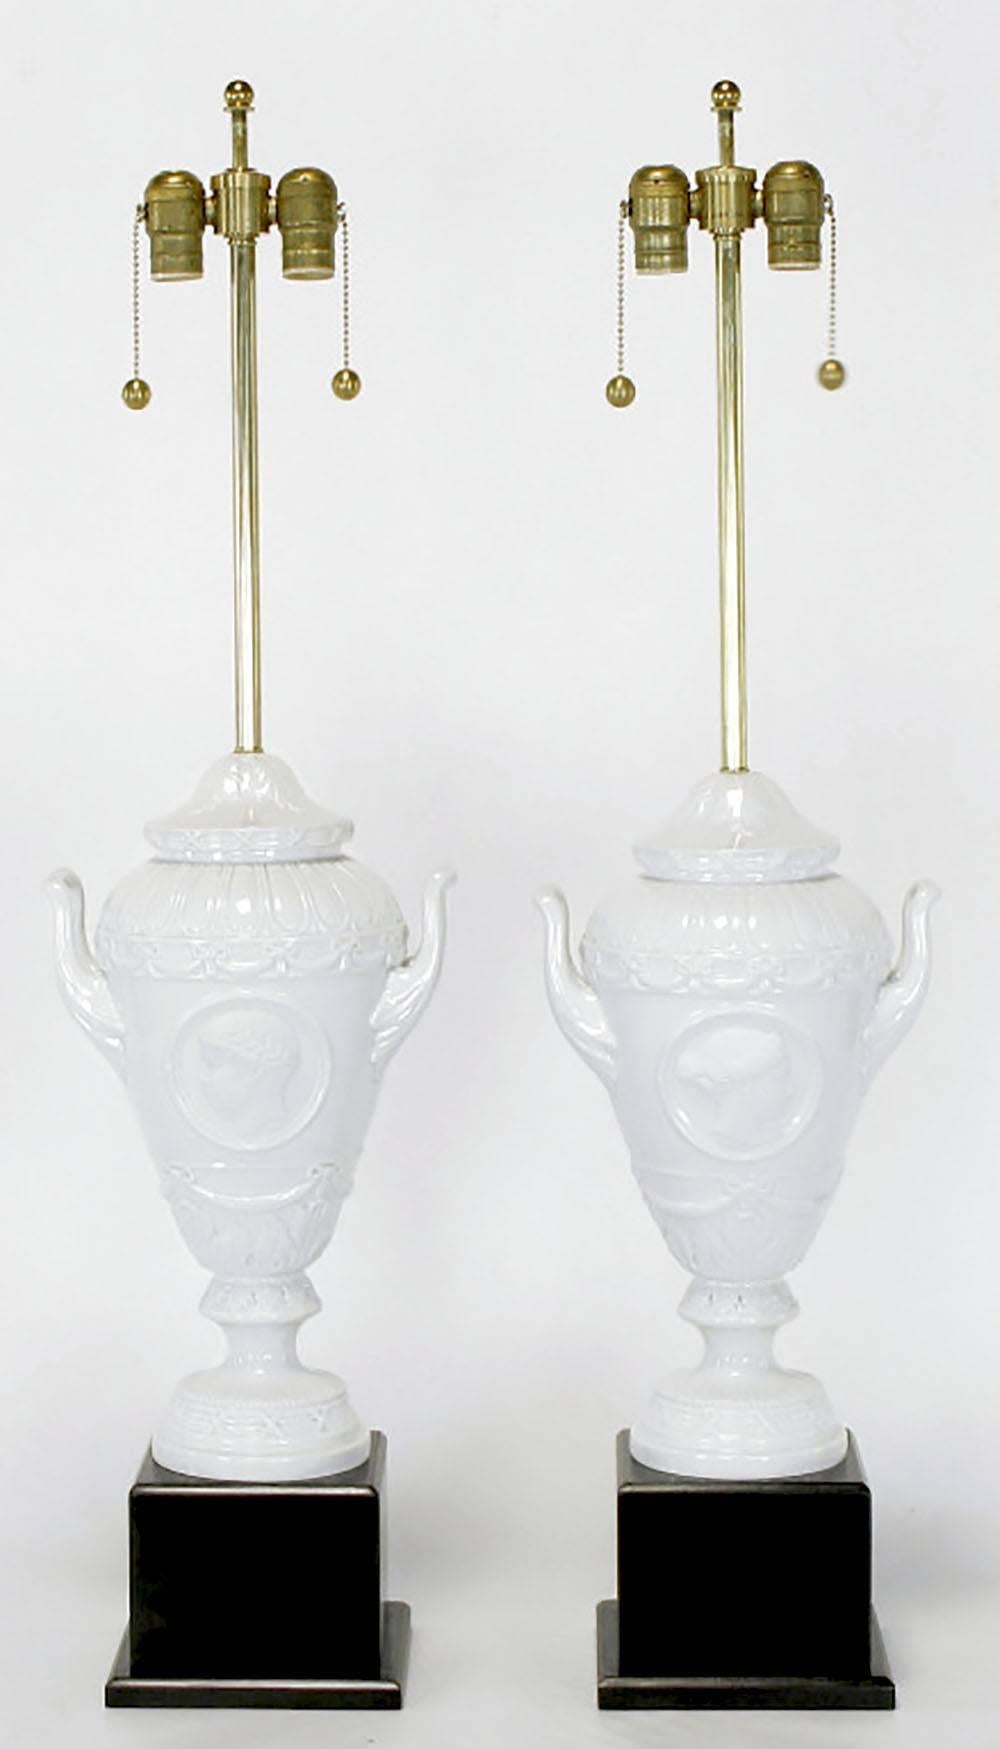 Fine pair of white German porcelain urn form table lamps with black lacquered wood plinth bases. Urn body is comprised of three parts with the flanged base, handled urn body, and bell shaped top being a separate pieces. Brass stem and Dual socket